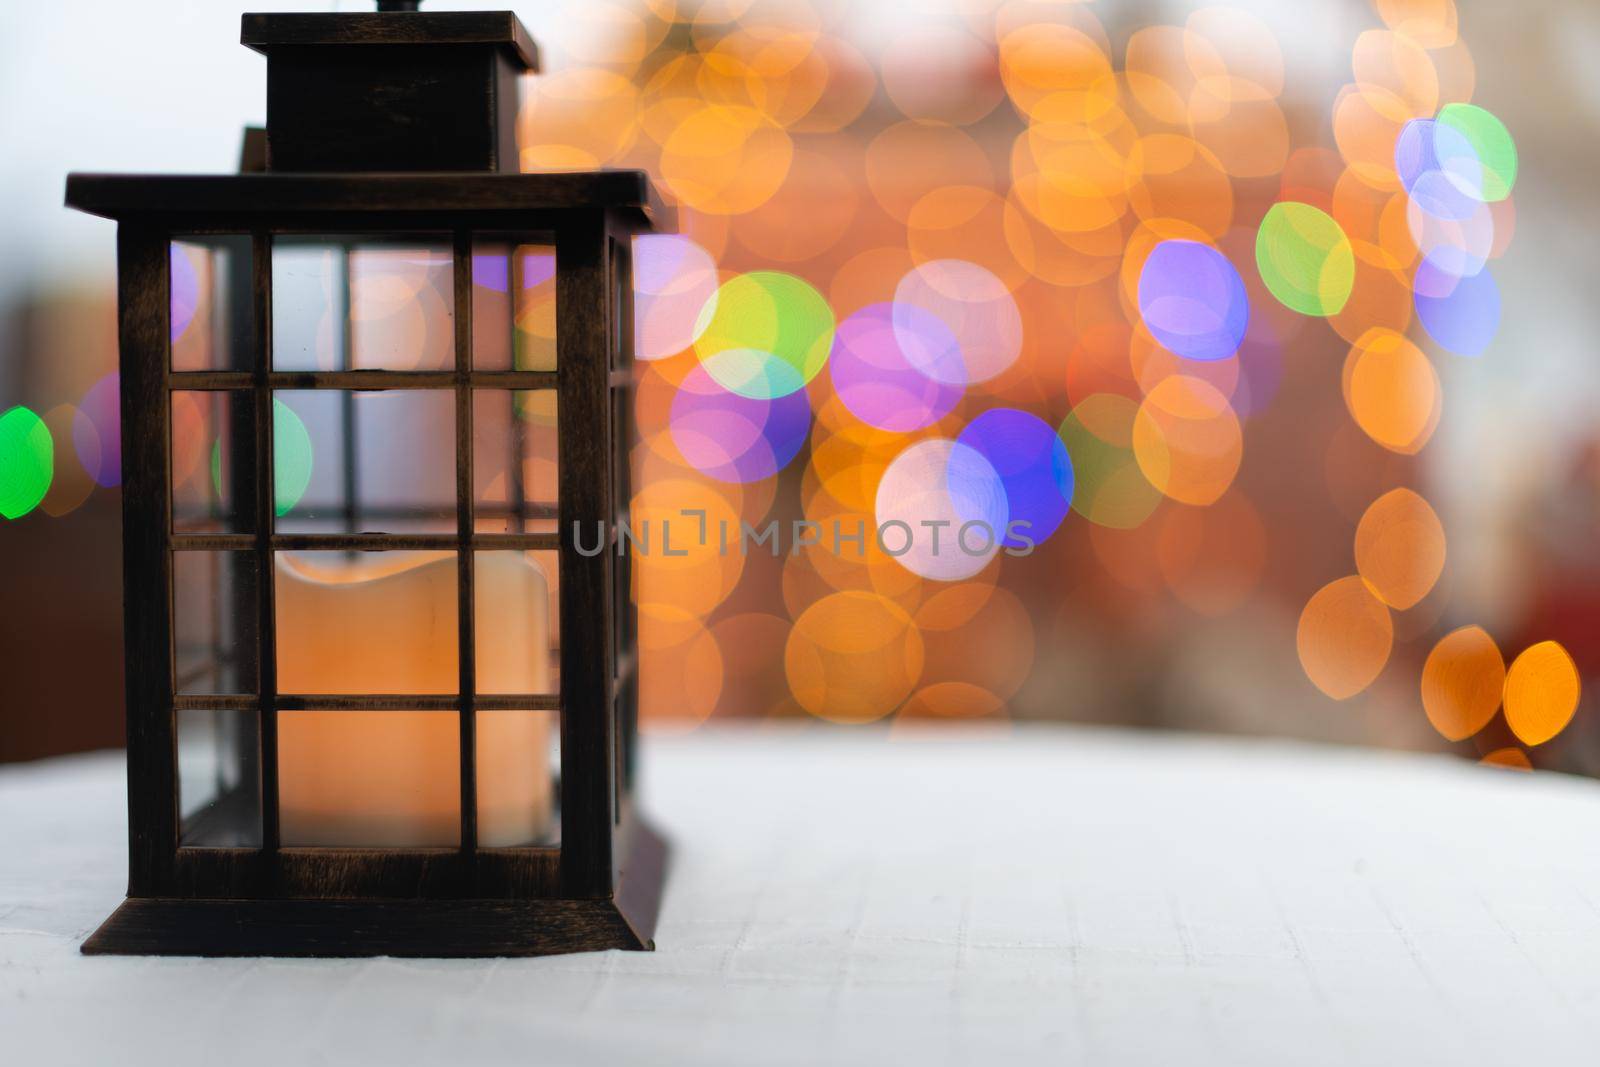 Old hand lantern with barely smoldering candle inside. On the second burn the background is blurred with Christmas tree lights and bokeh by fotodrobik